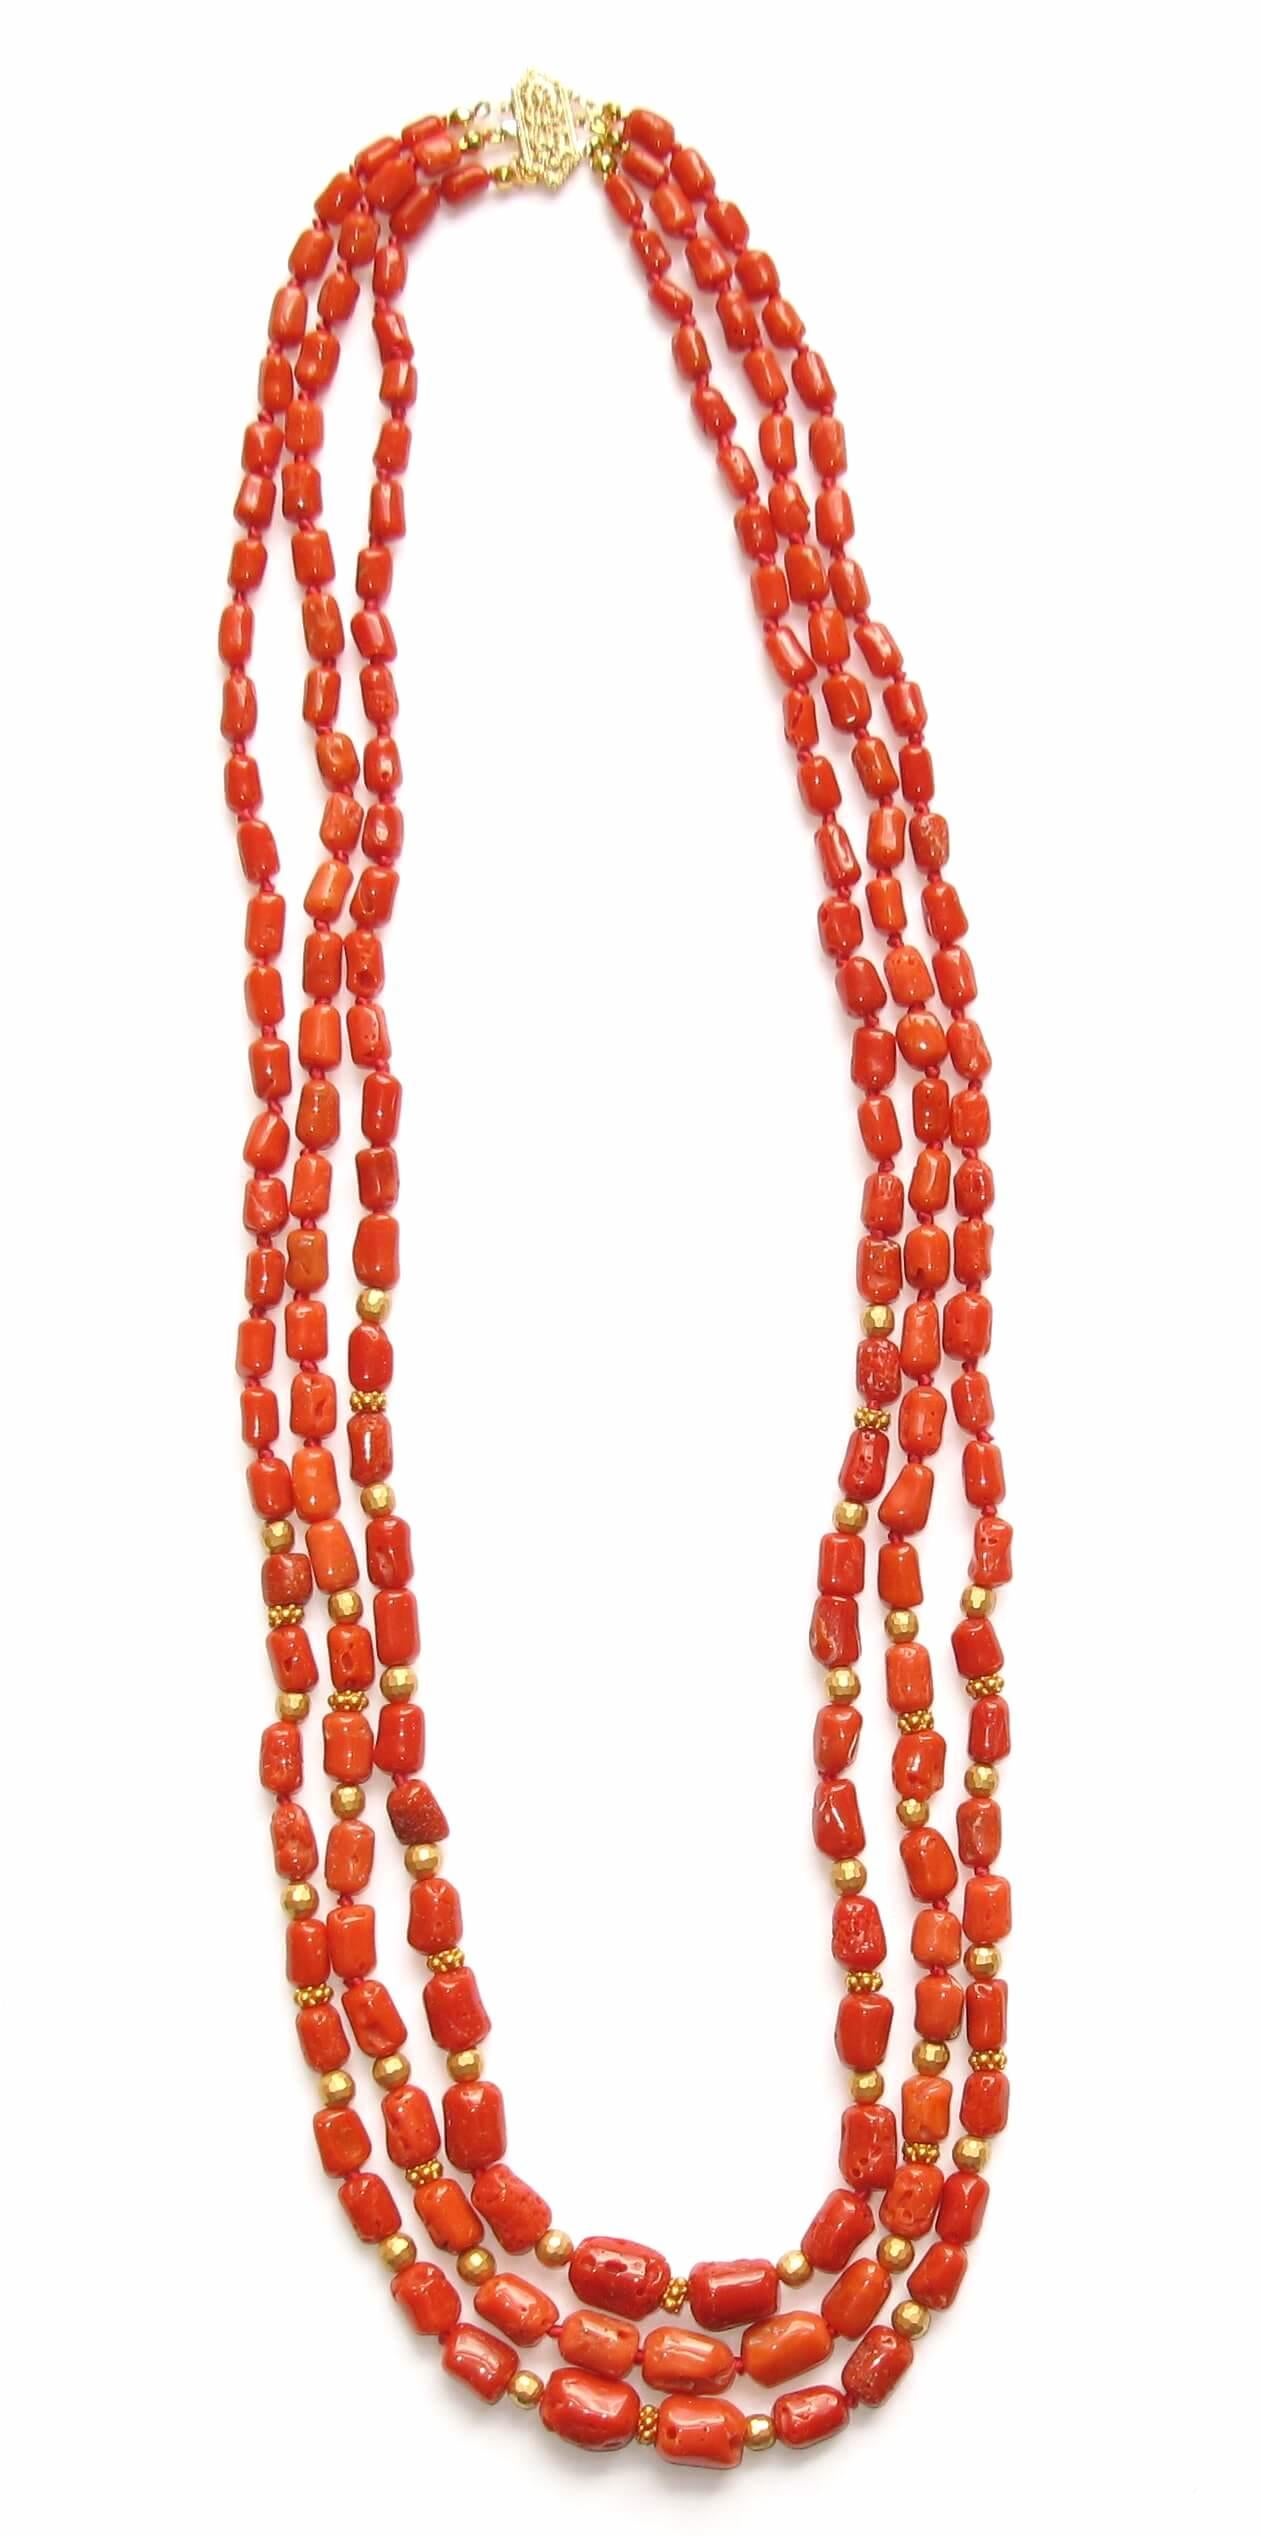 18 Karat Yellow Gold Coral Red Beaded 3 Strand Rope Necklace

A gorgeous red coral beaded necklace will rarely go overlooked. This versatile necklace looks incredible when worn alone, but you can elevate your look by pairing it with earrings. This